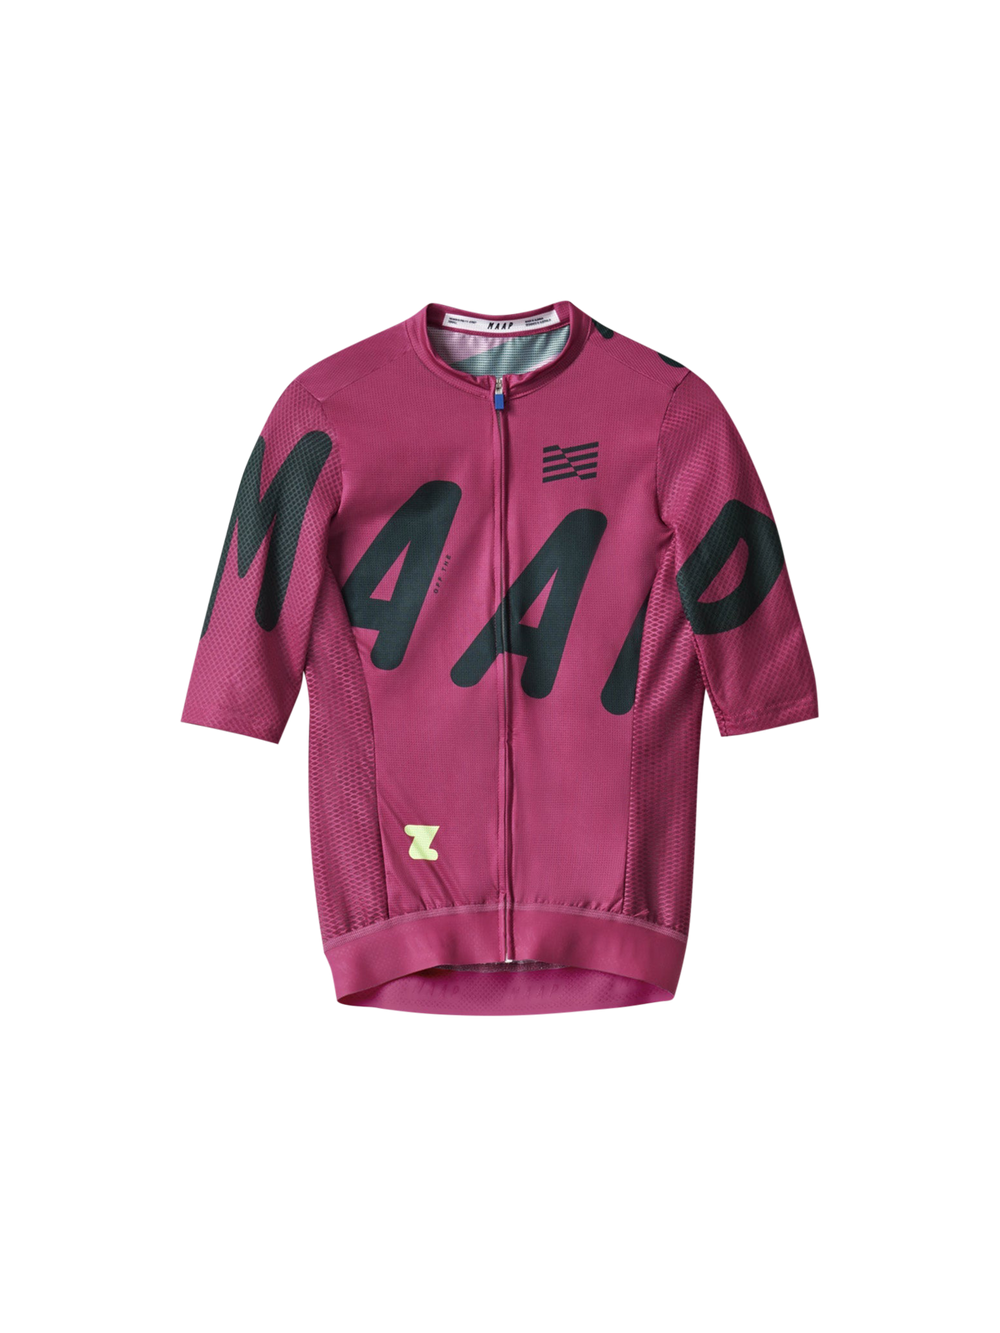 Product Image for MAAP x ZWIFT 2022 Women's Pro Air Jersey